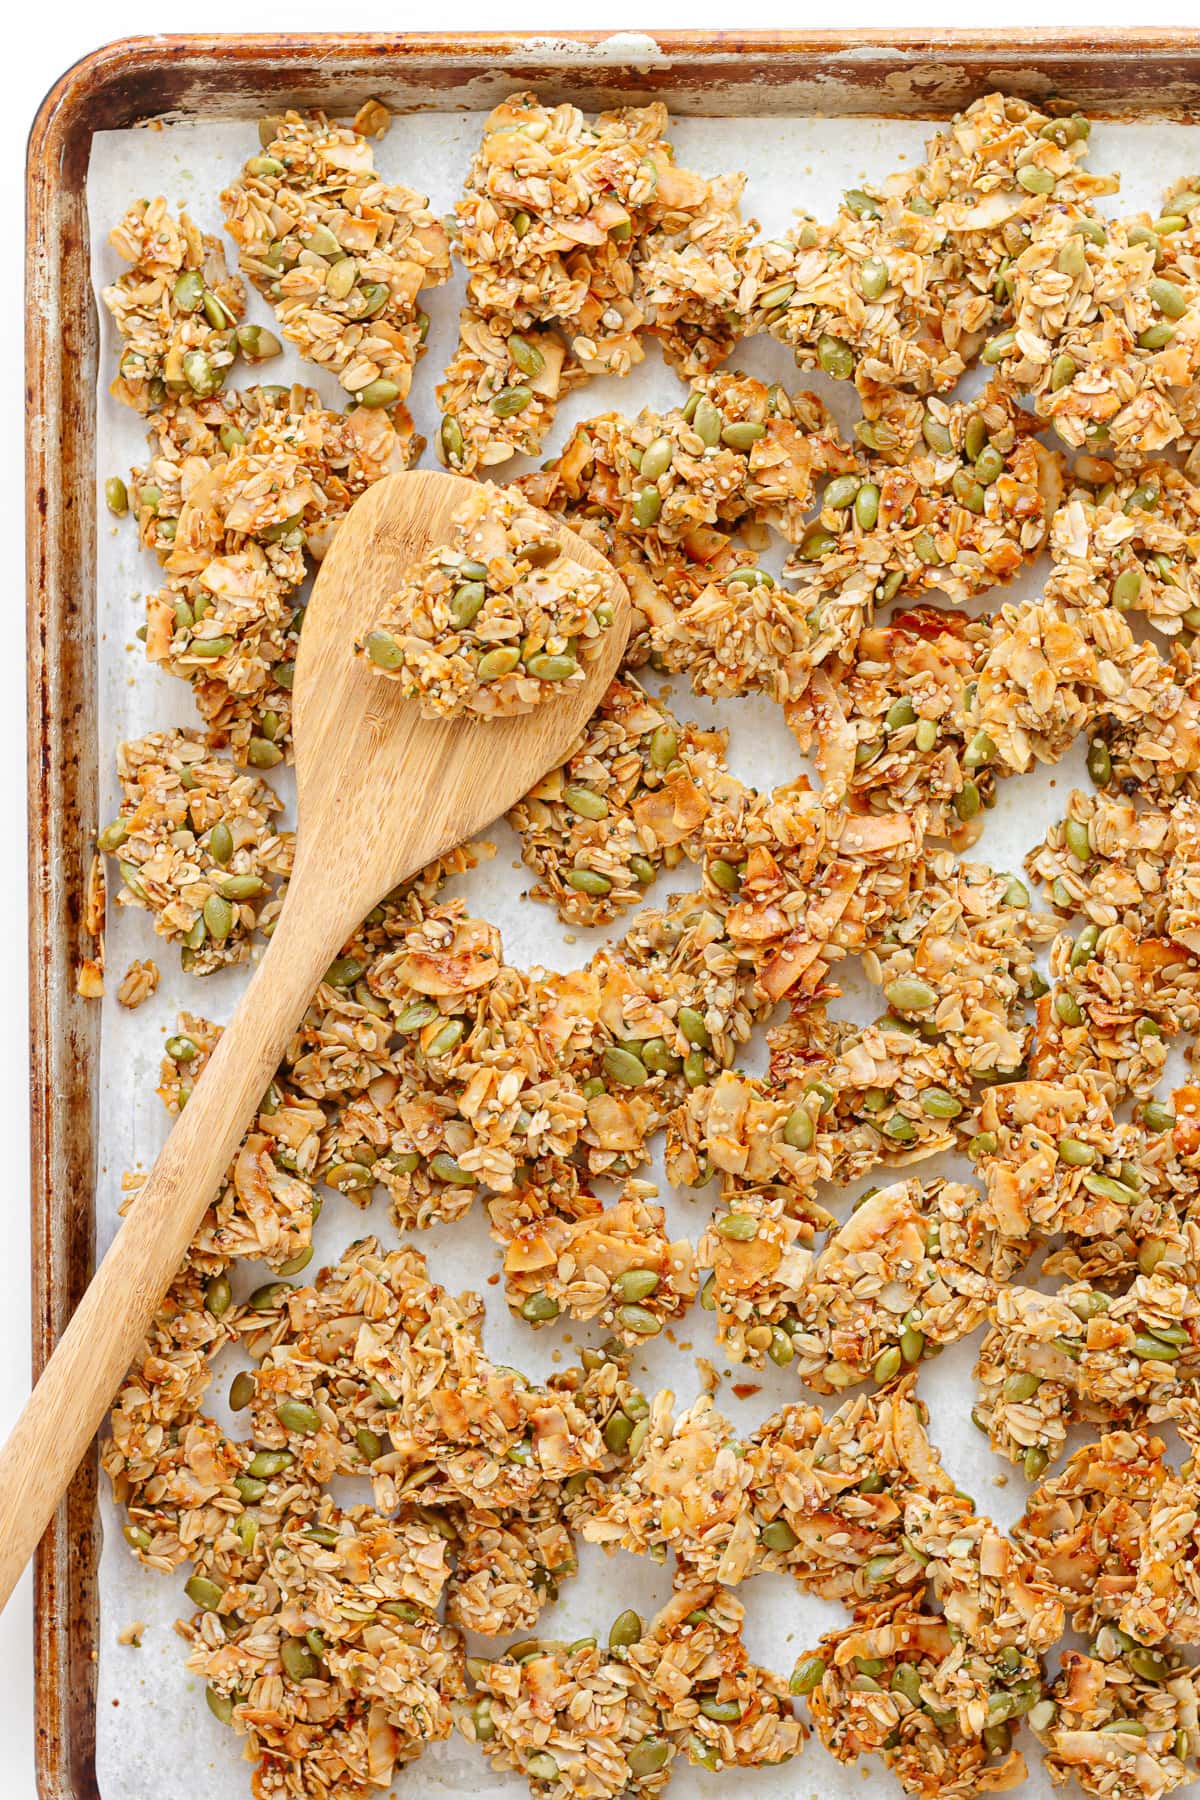 Vanilla coconut granola clusters on a parchment paper lined baking sheet with a wooden spatula.